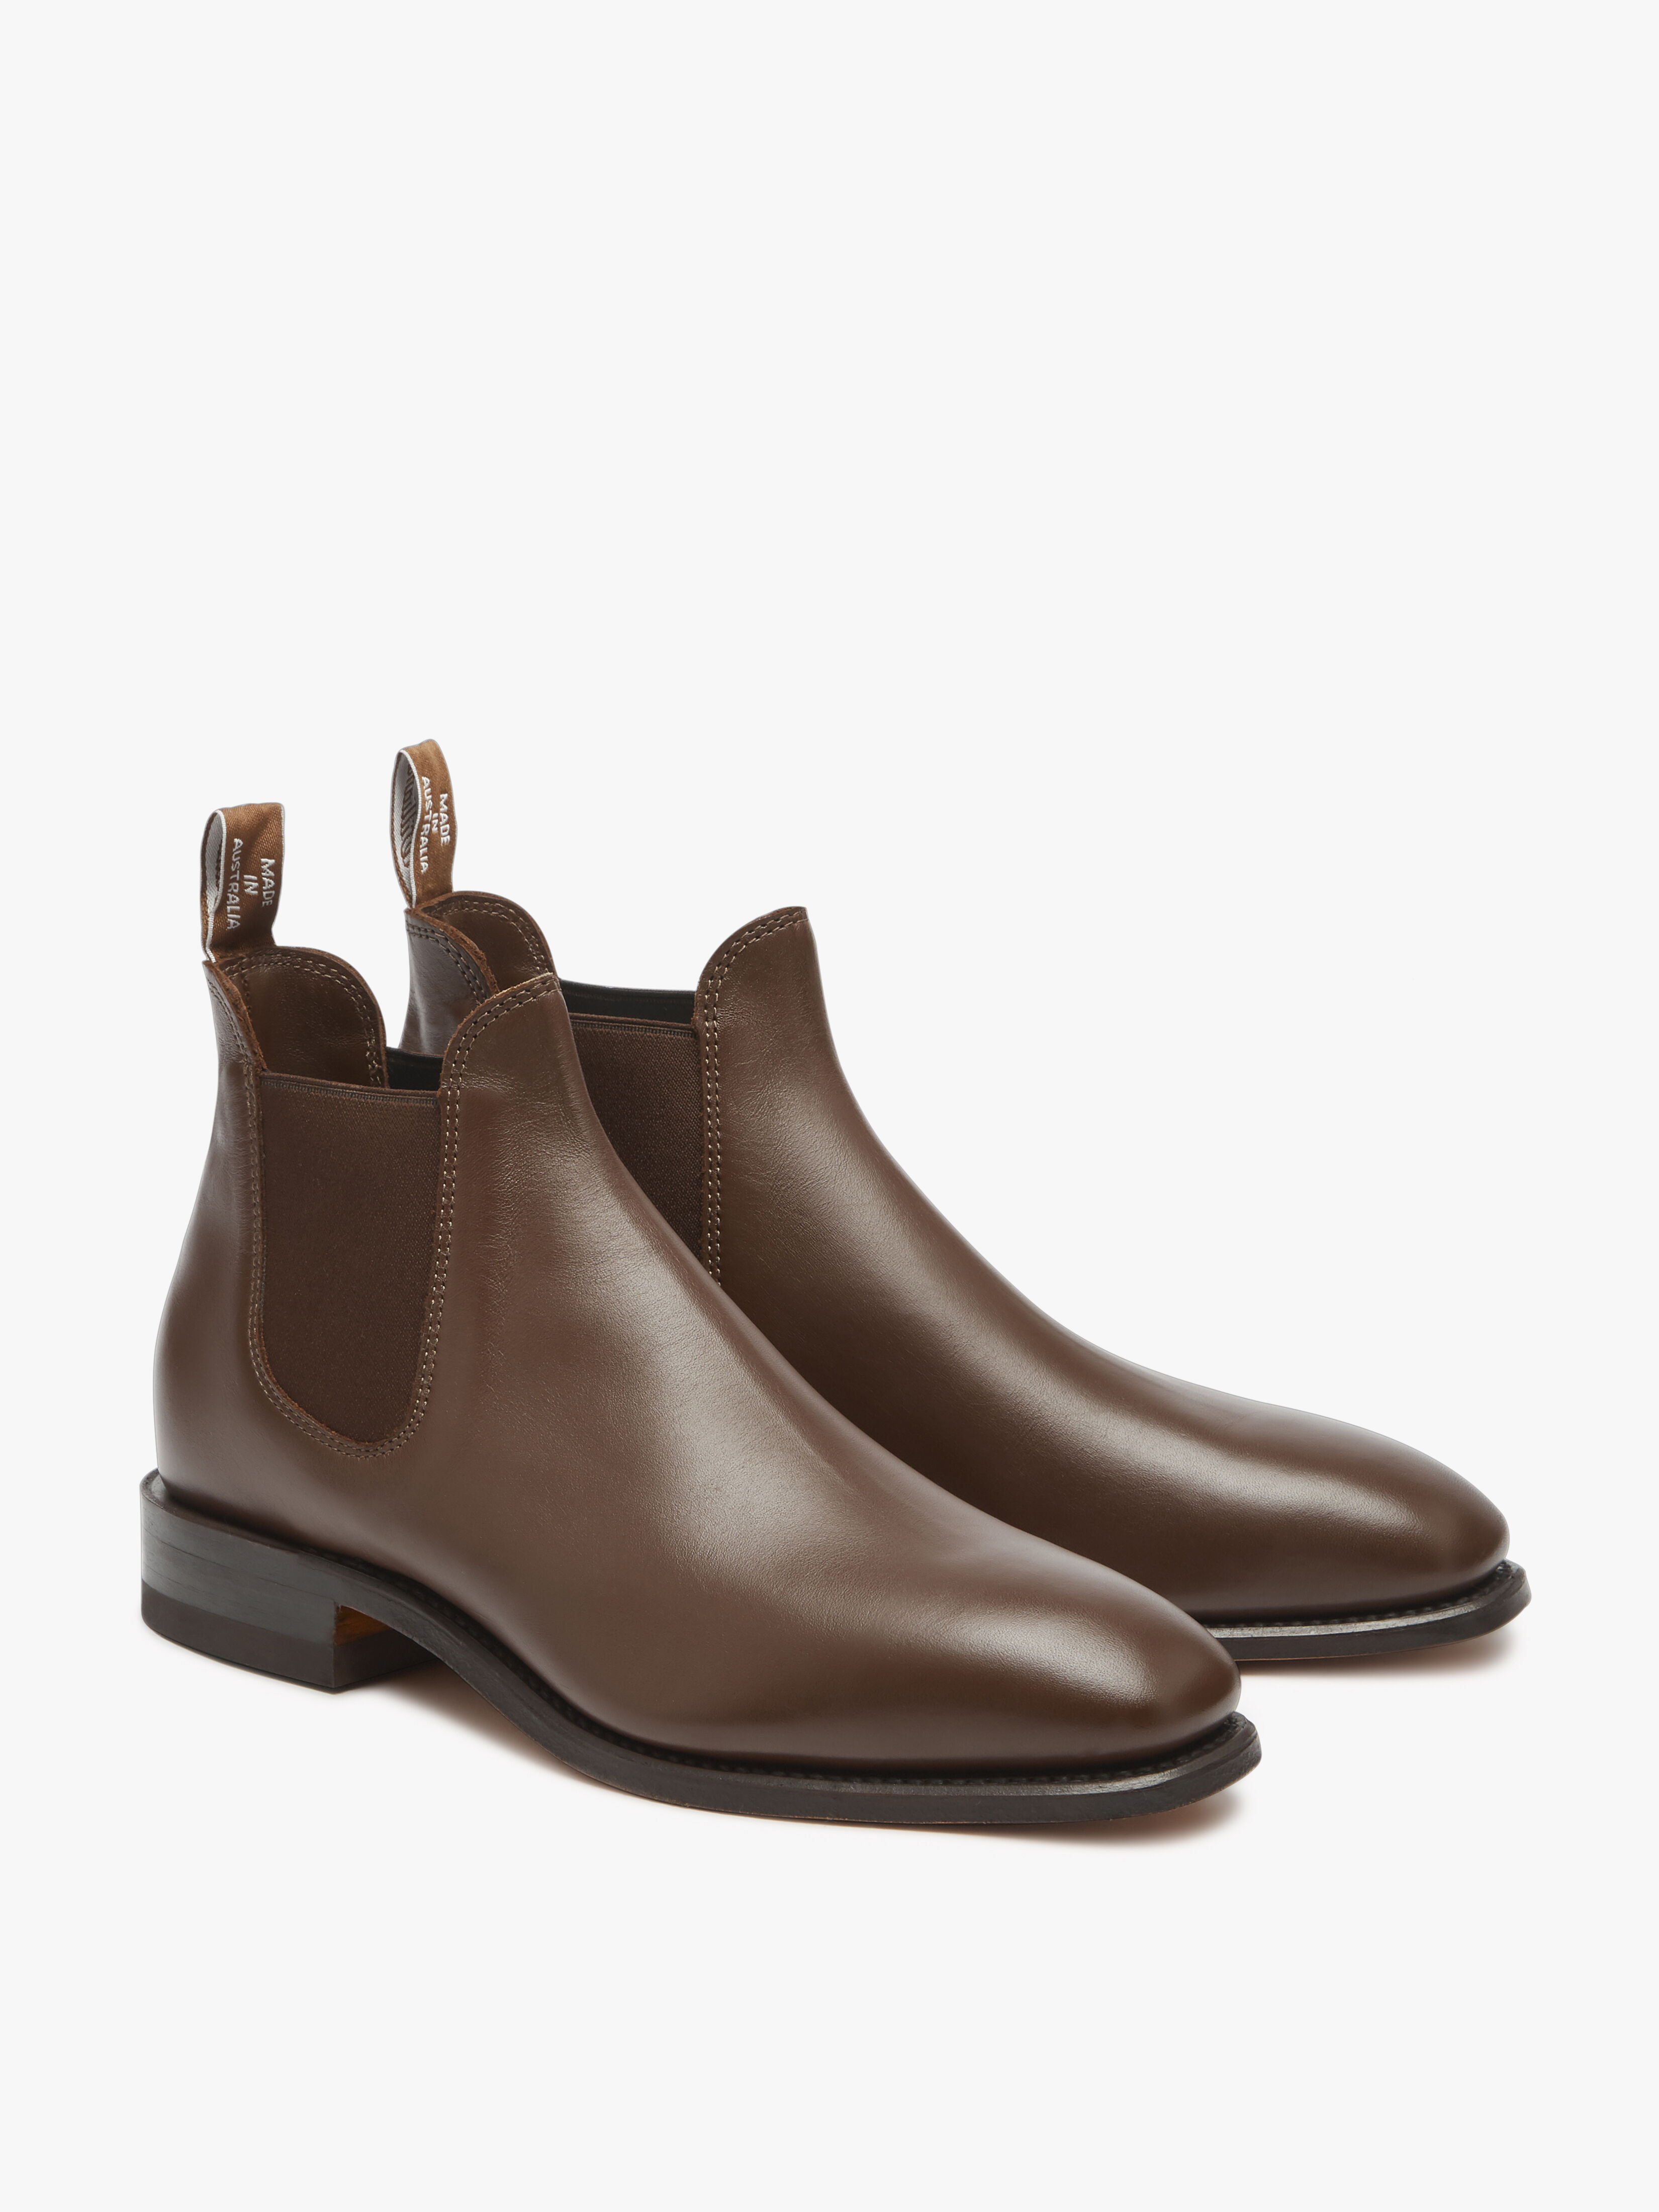 rm williams boots outfit